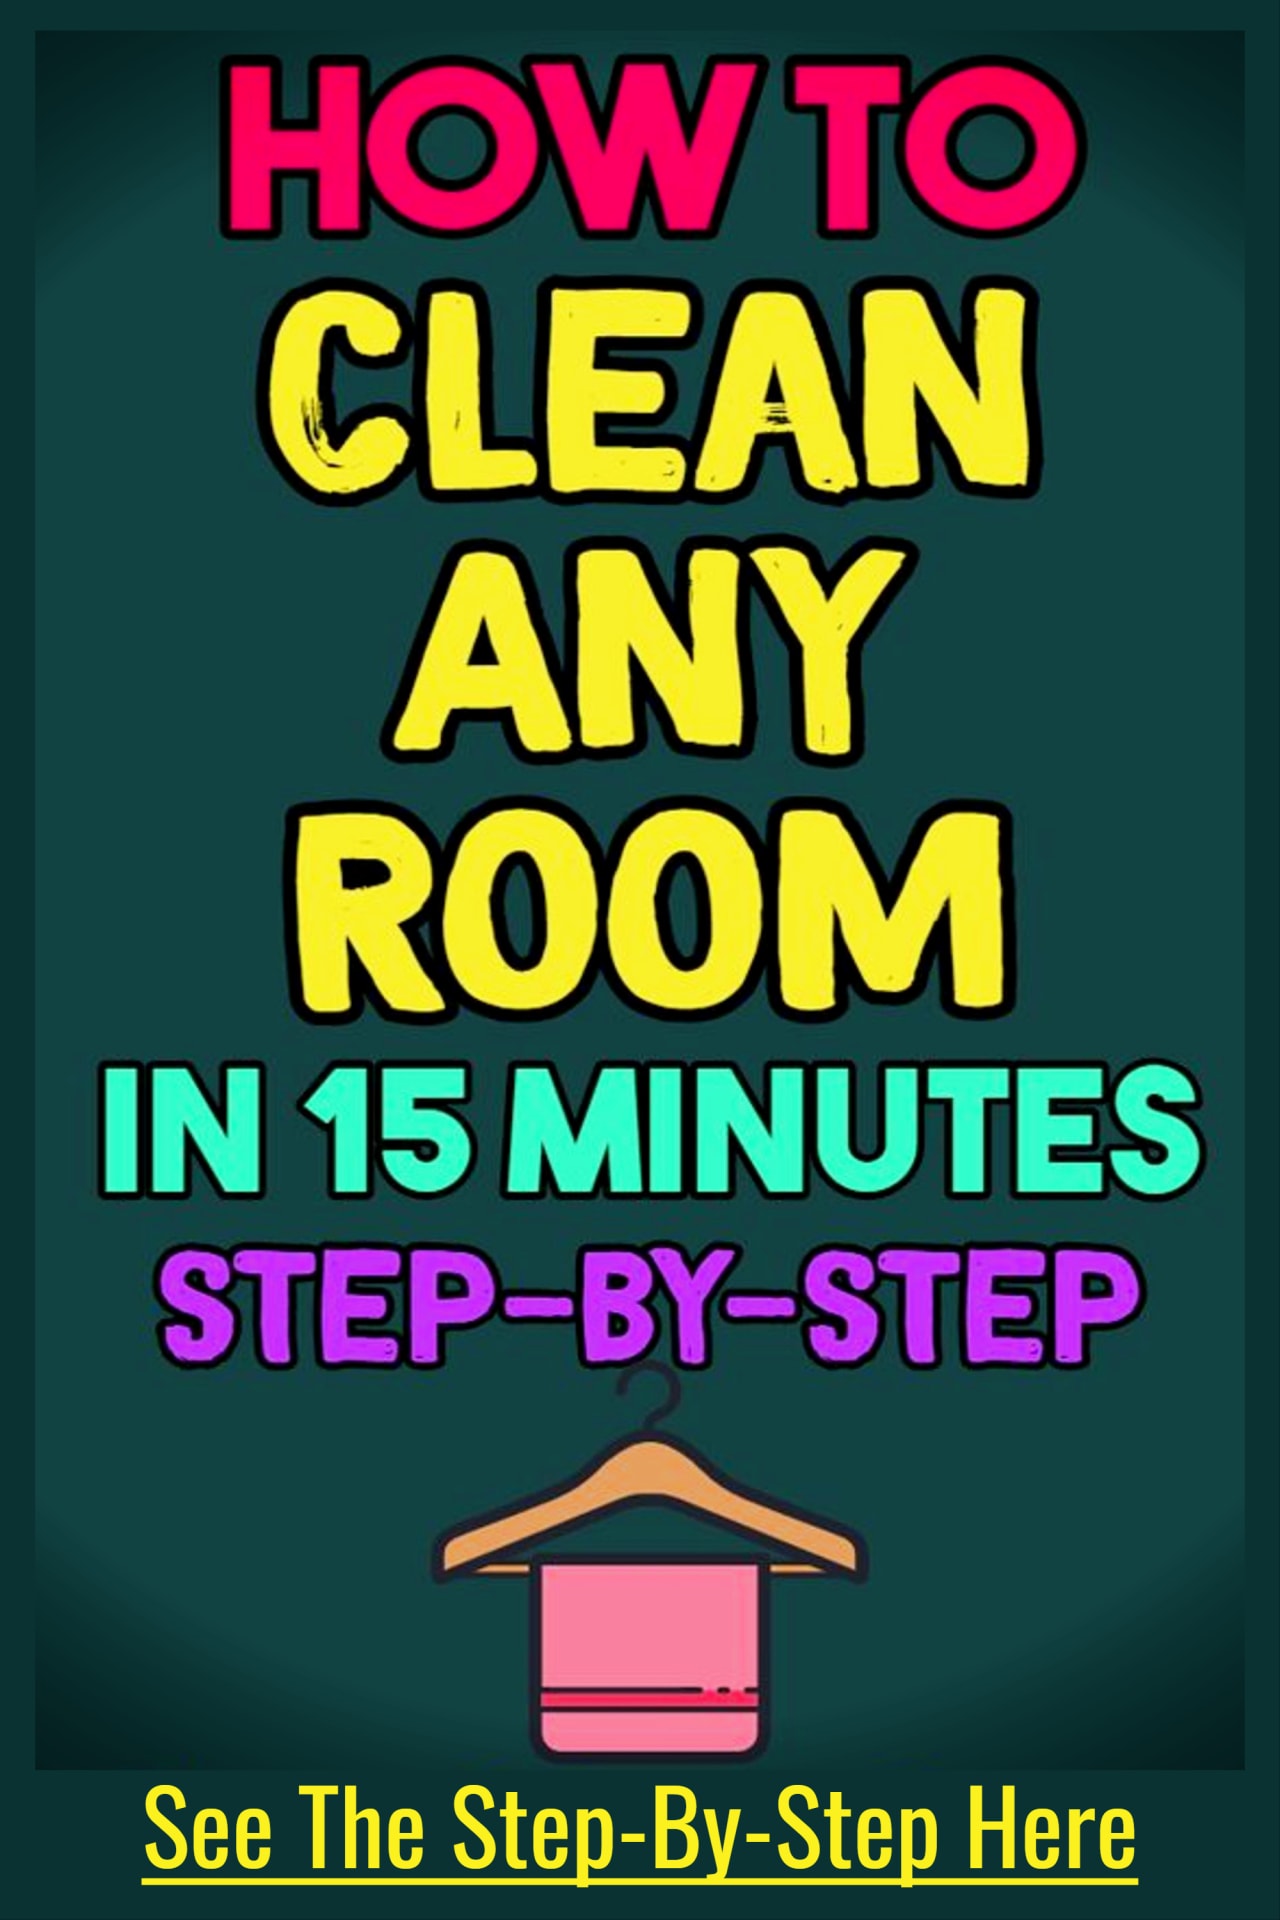 How to clean a cluttered house FAST - clean any room fast step by step and room by room to an uncluttered house on a budget - even if feeling overwhelmed